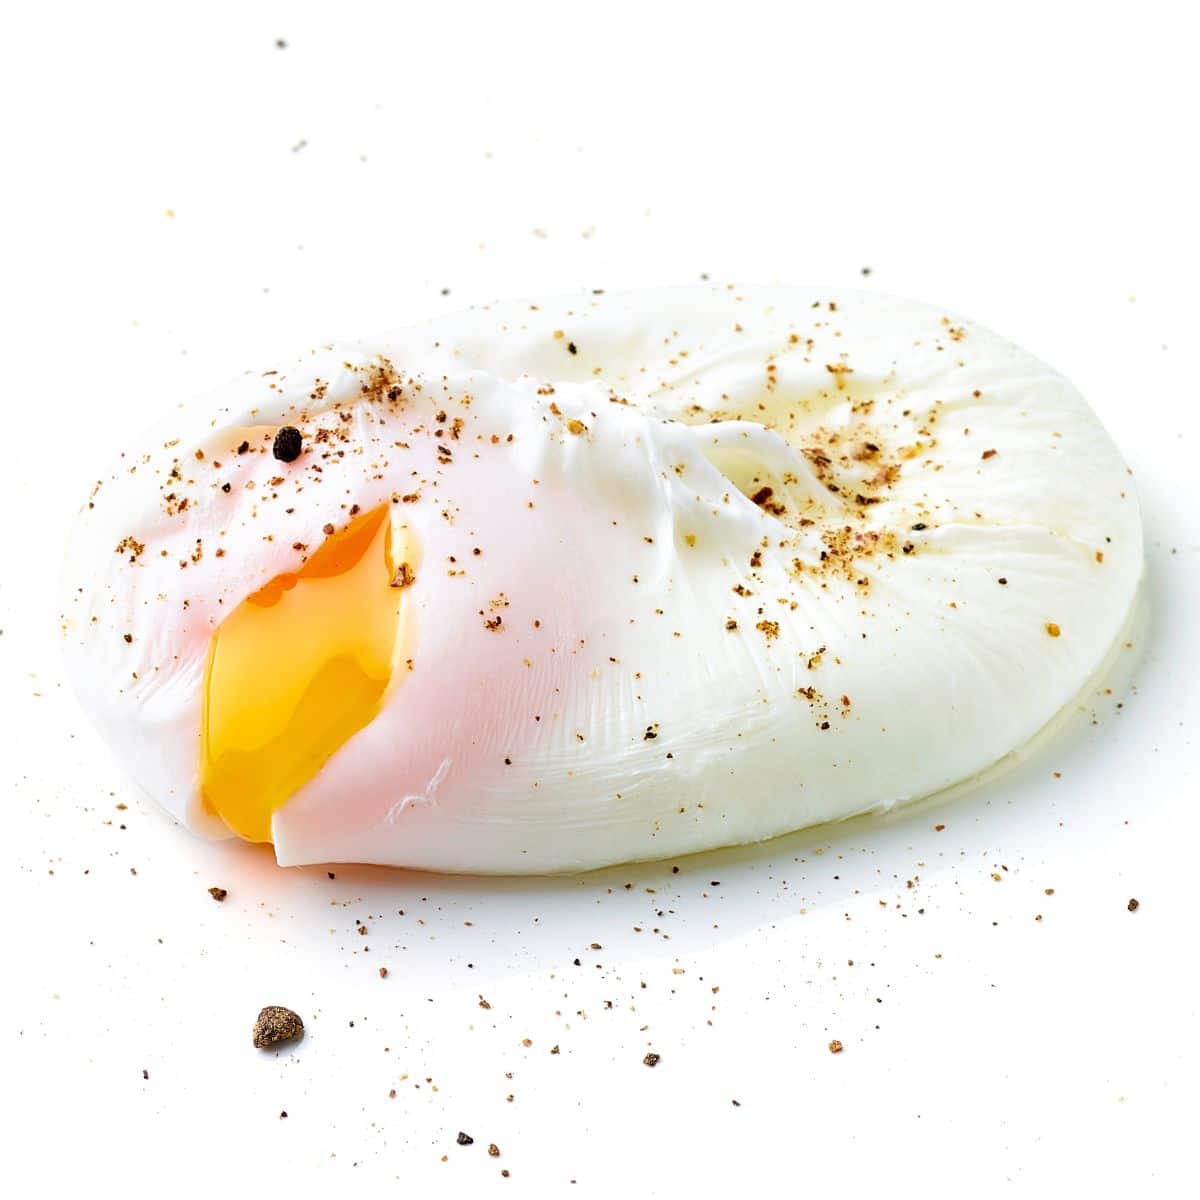 Poached egg on a white background.